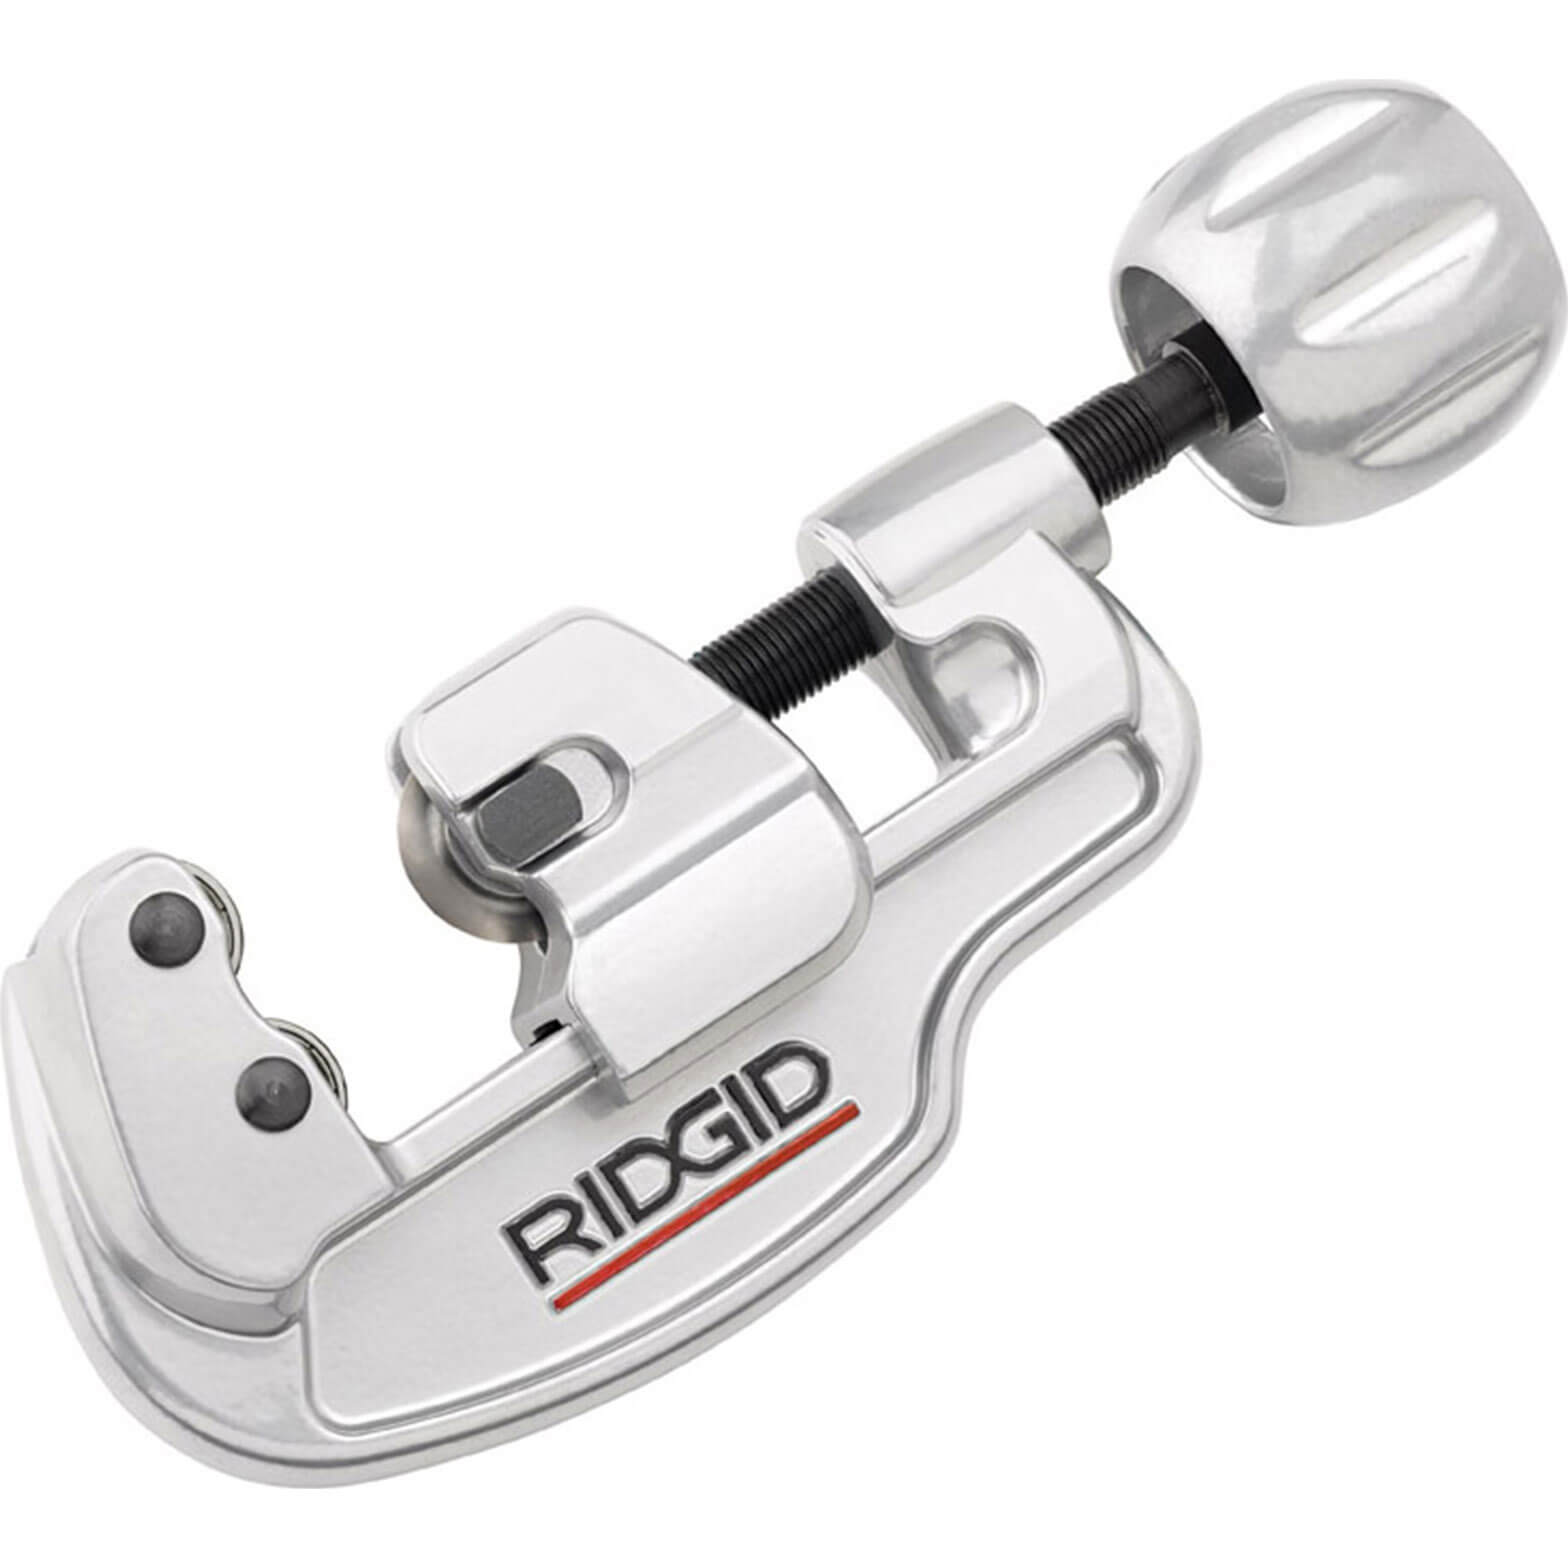 Image of Ridgid Adjustable Pipe Cutter for Stainless Steel 5mm - 35mm